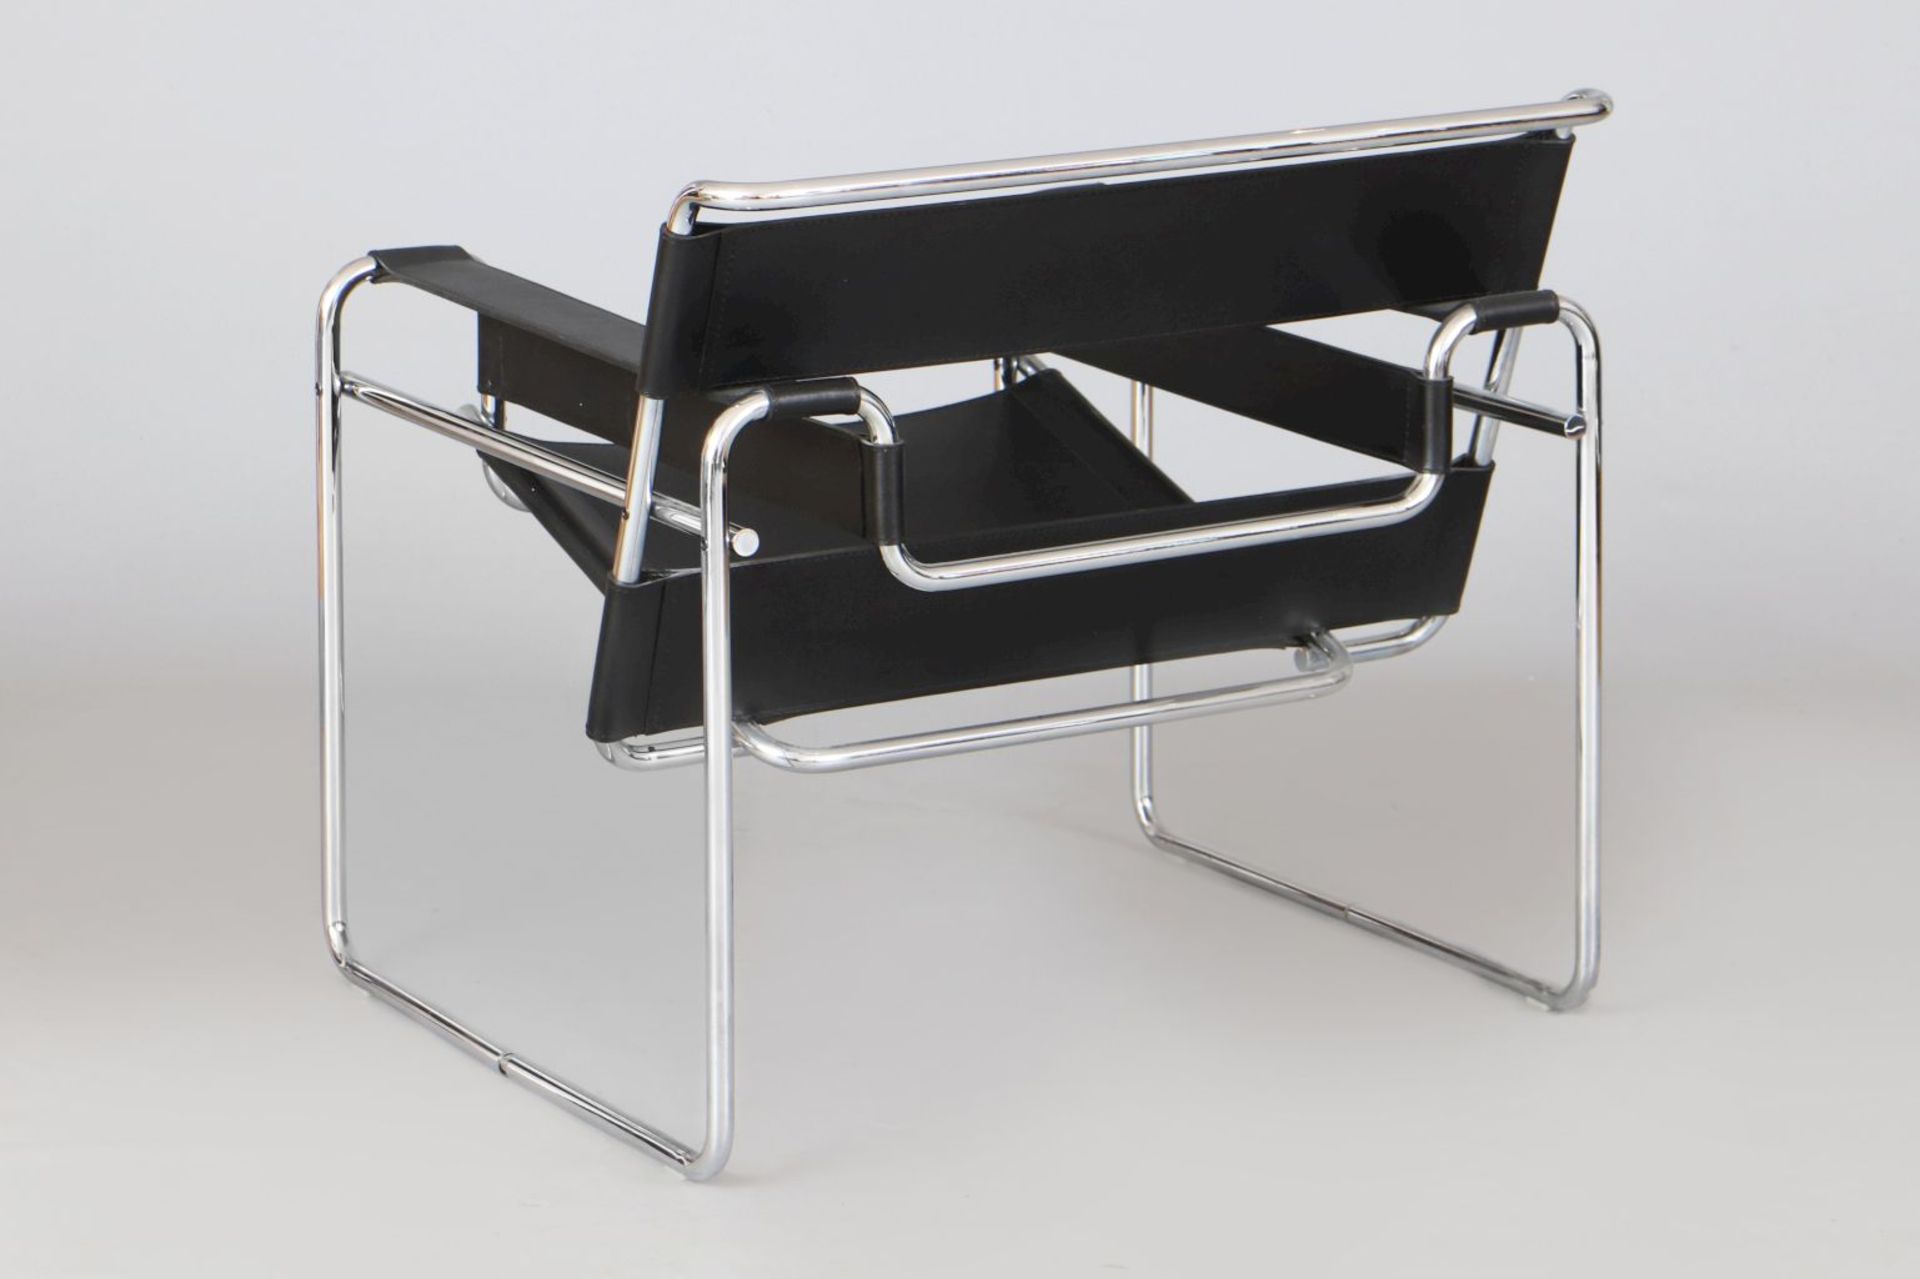 MARCEL BREUER ¨Wassily Chair¨ - Image 3 of 3